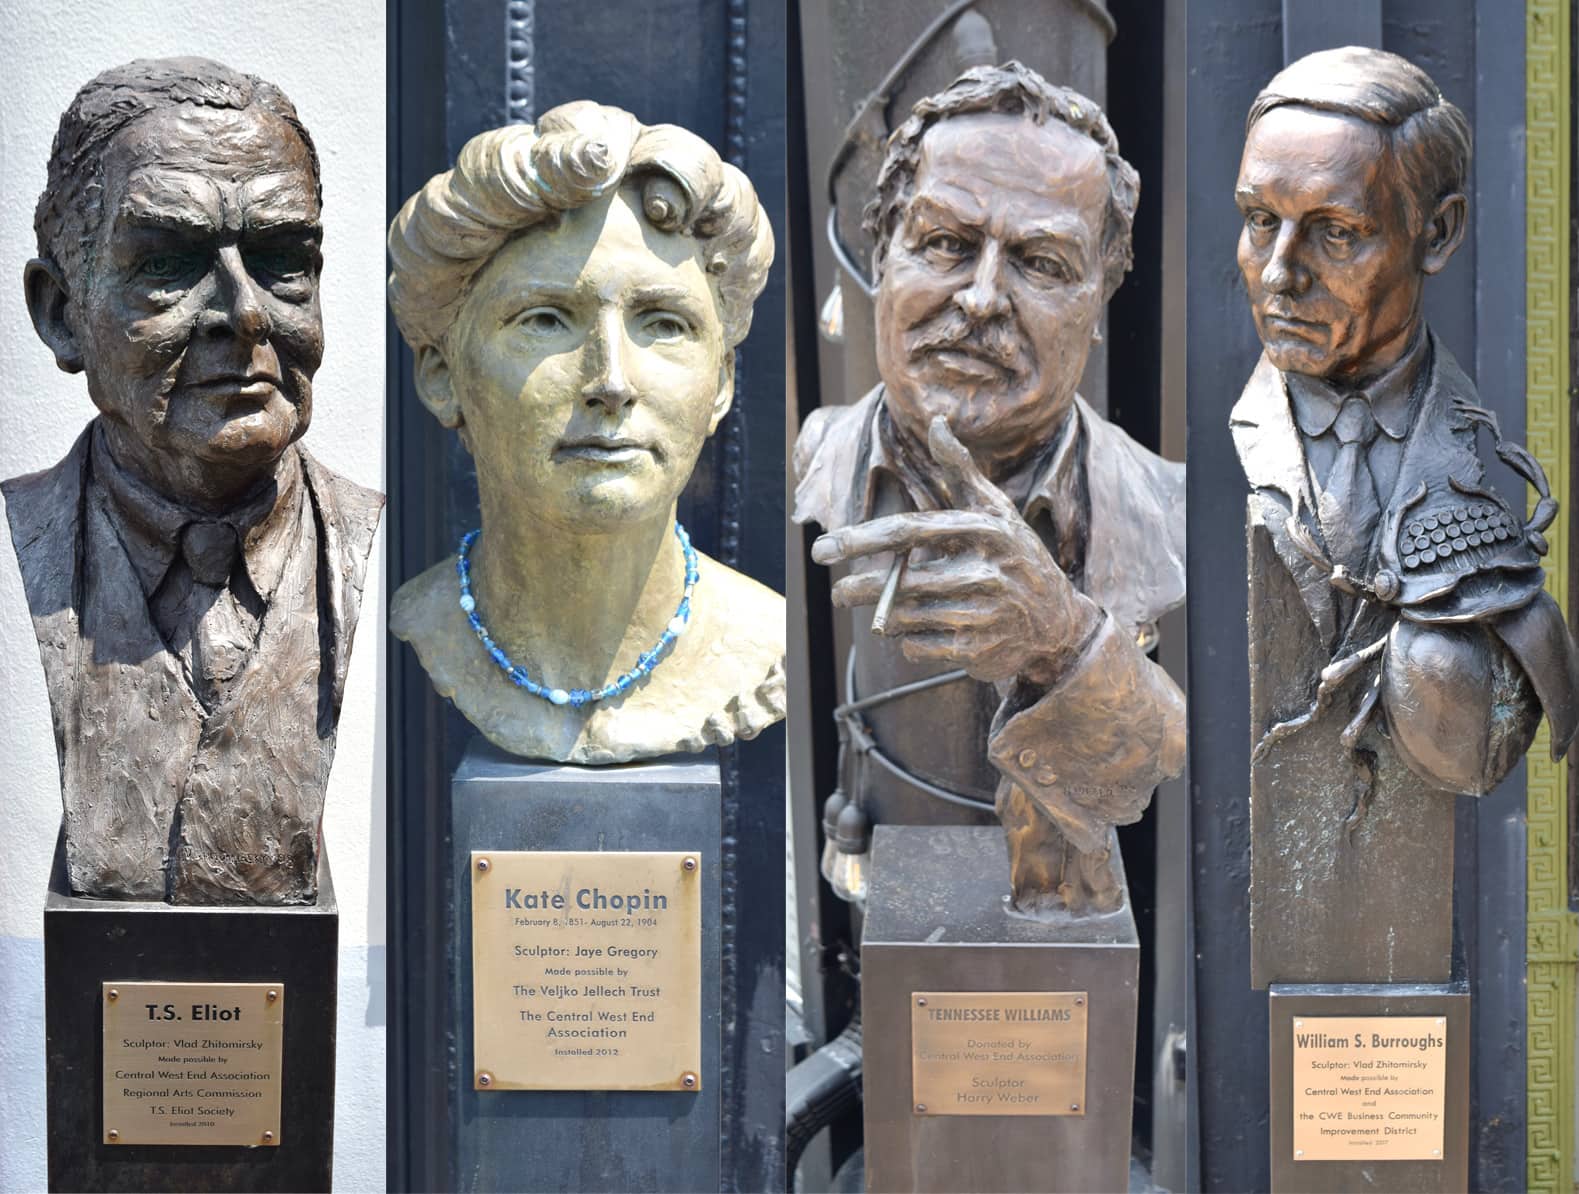 4 statues in Writers Corner in the Central West End - T.S. Elliot, Kate Chopin, Tennessee Williams, William S. Burroughs